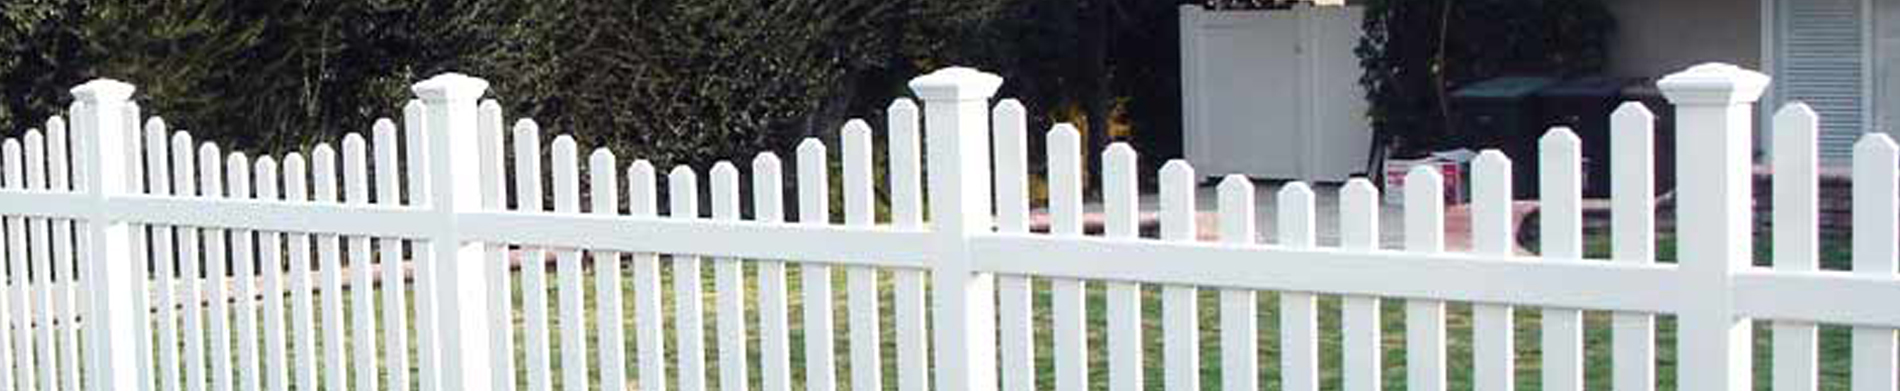 Answering the Most Asked Questions About Vinyl Fences!